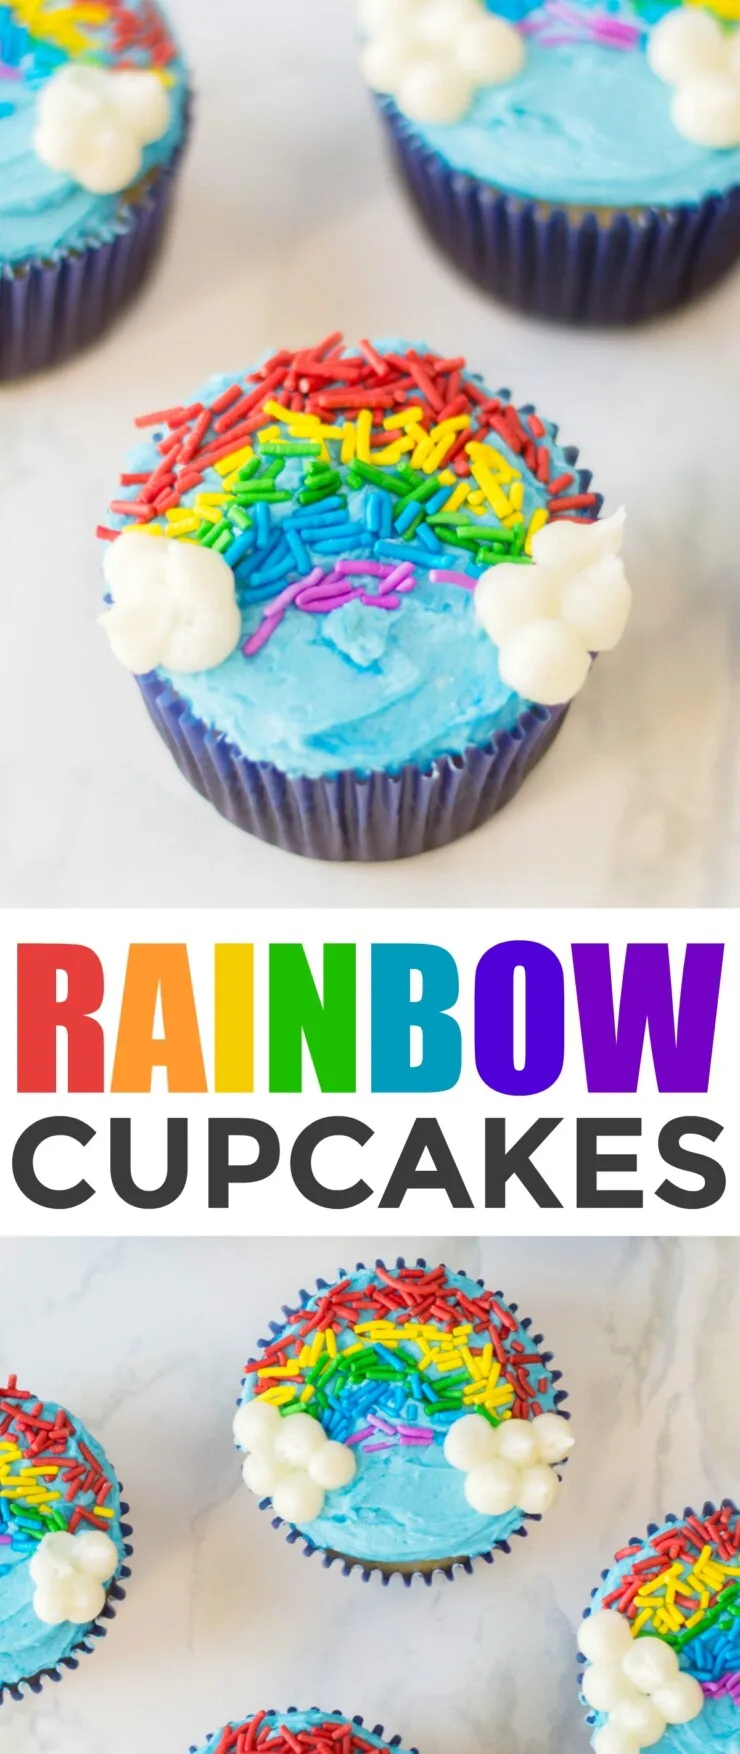 Rainbow sprinkle cupcakes are a cute and easy treat that are perfect for classroom St. Patrick's Day parties. Kids are sure to love these bright and colourful cupcakes!